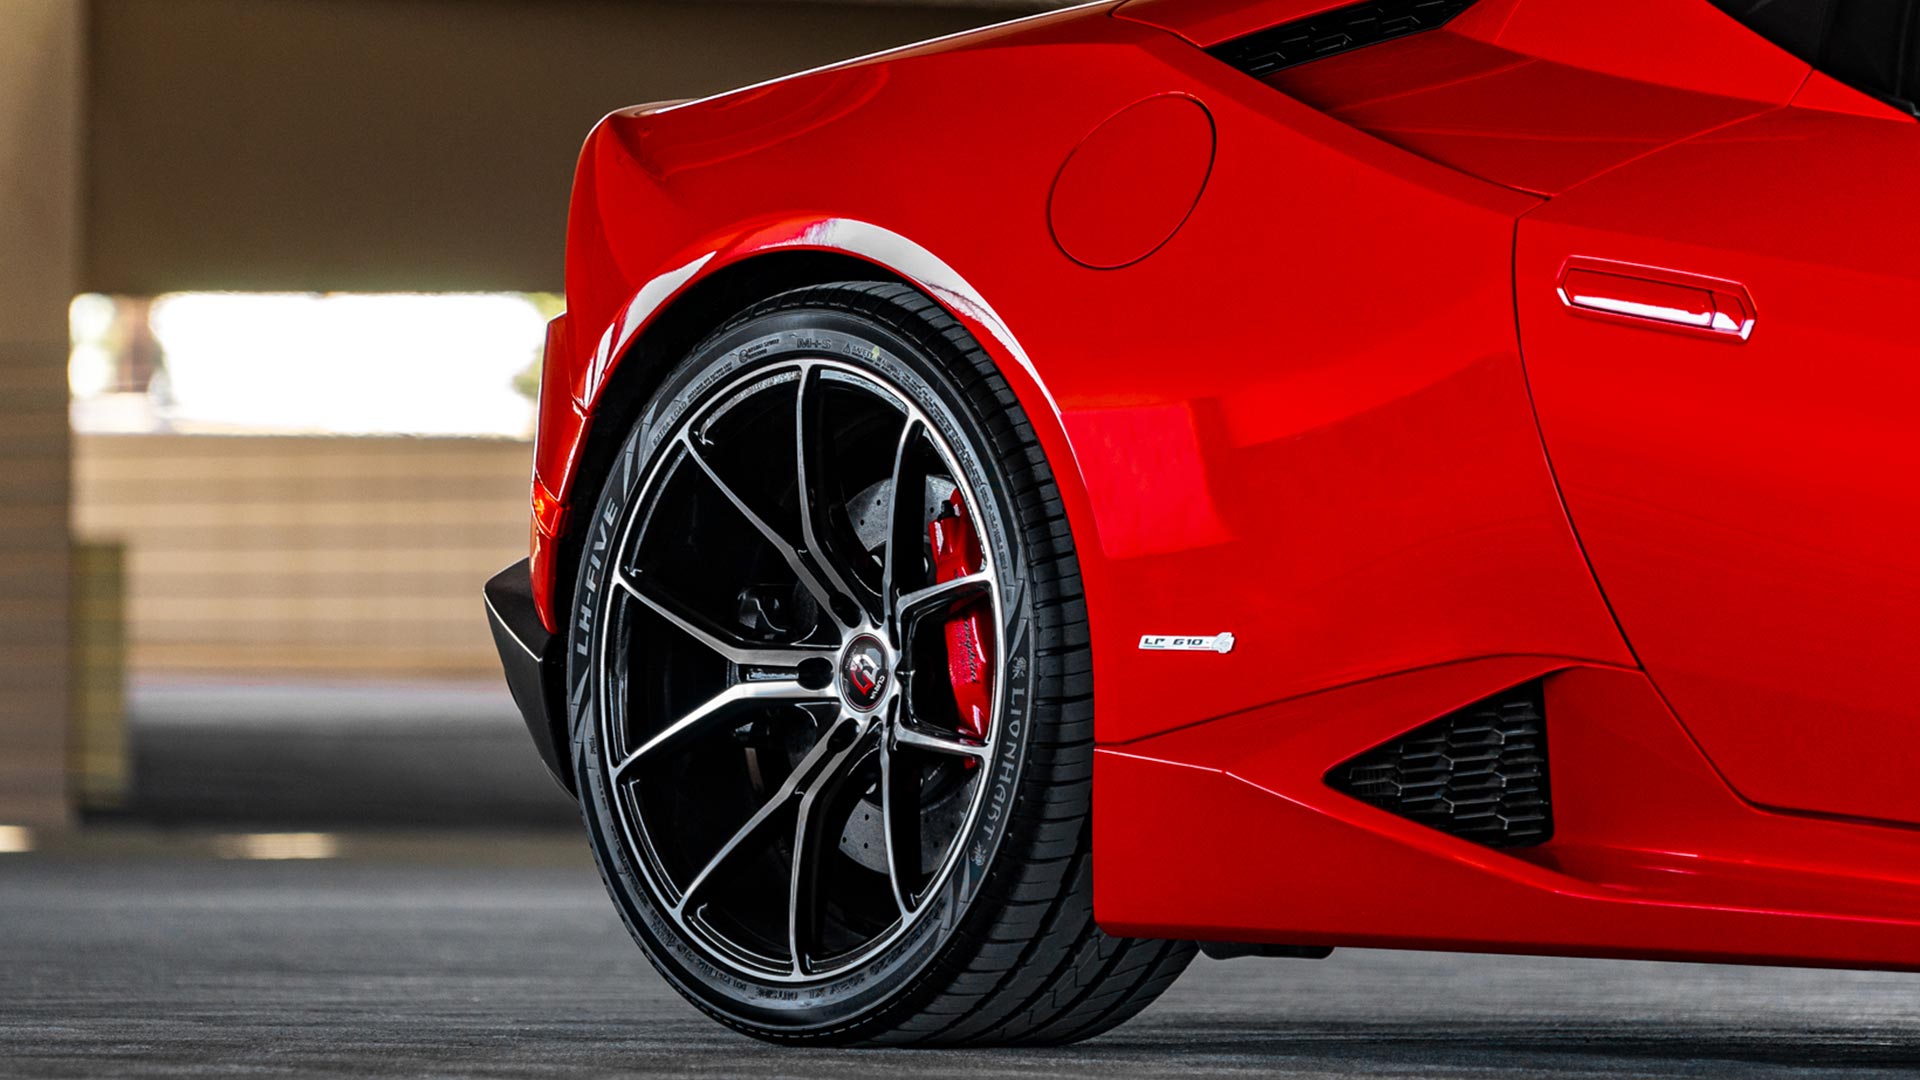 Image of a red Lamborghini Huracan with Lionhart Tires